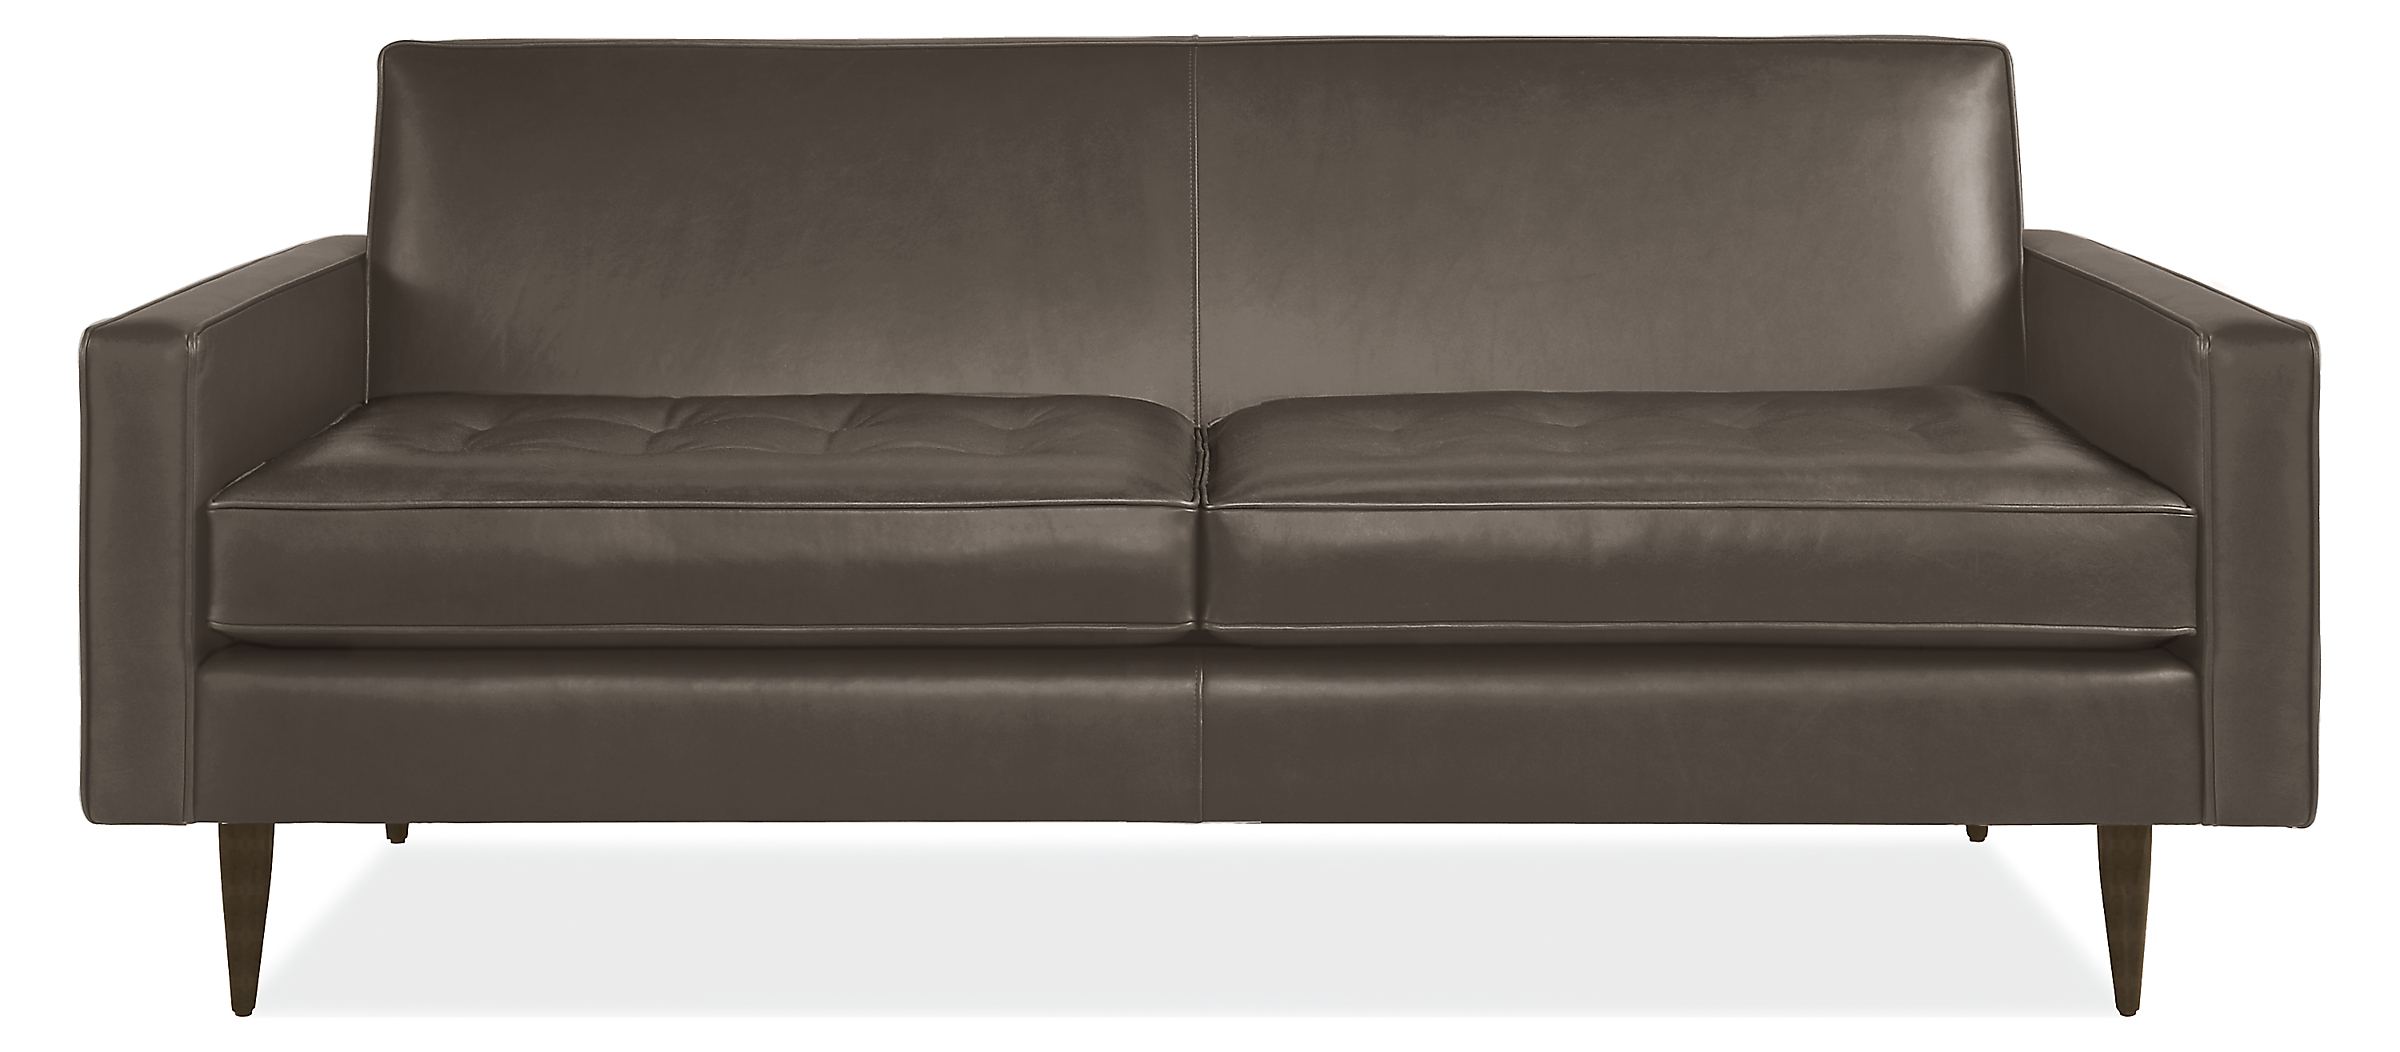 Reese Leather Sofa, Every Last Yard Event